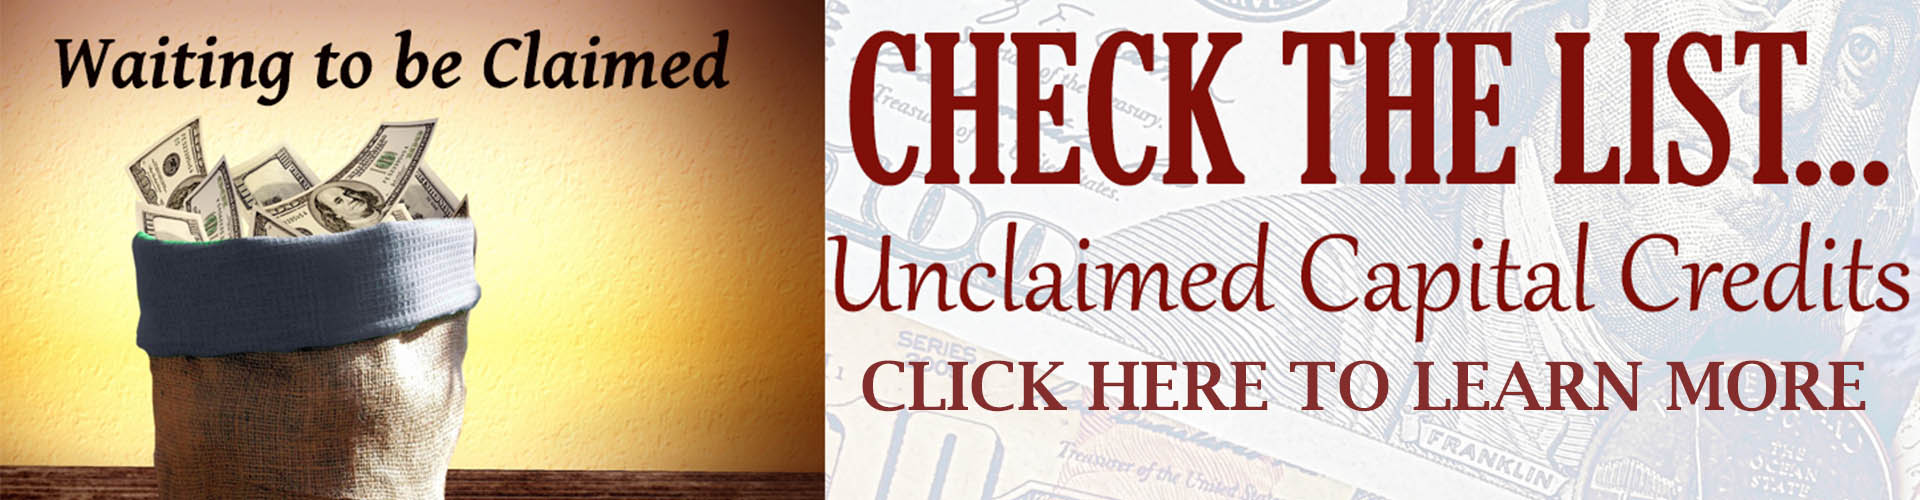 Click here to view listing of unclaimed capital credits